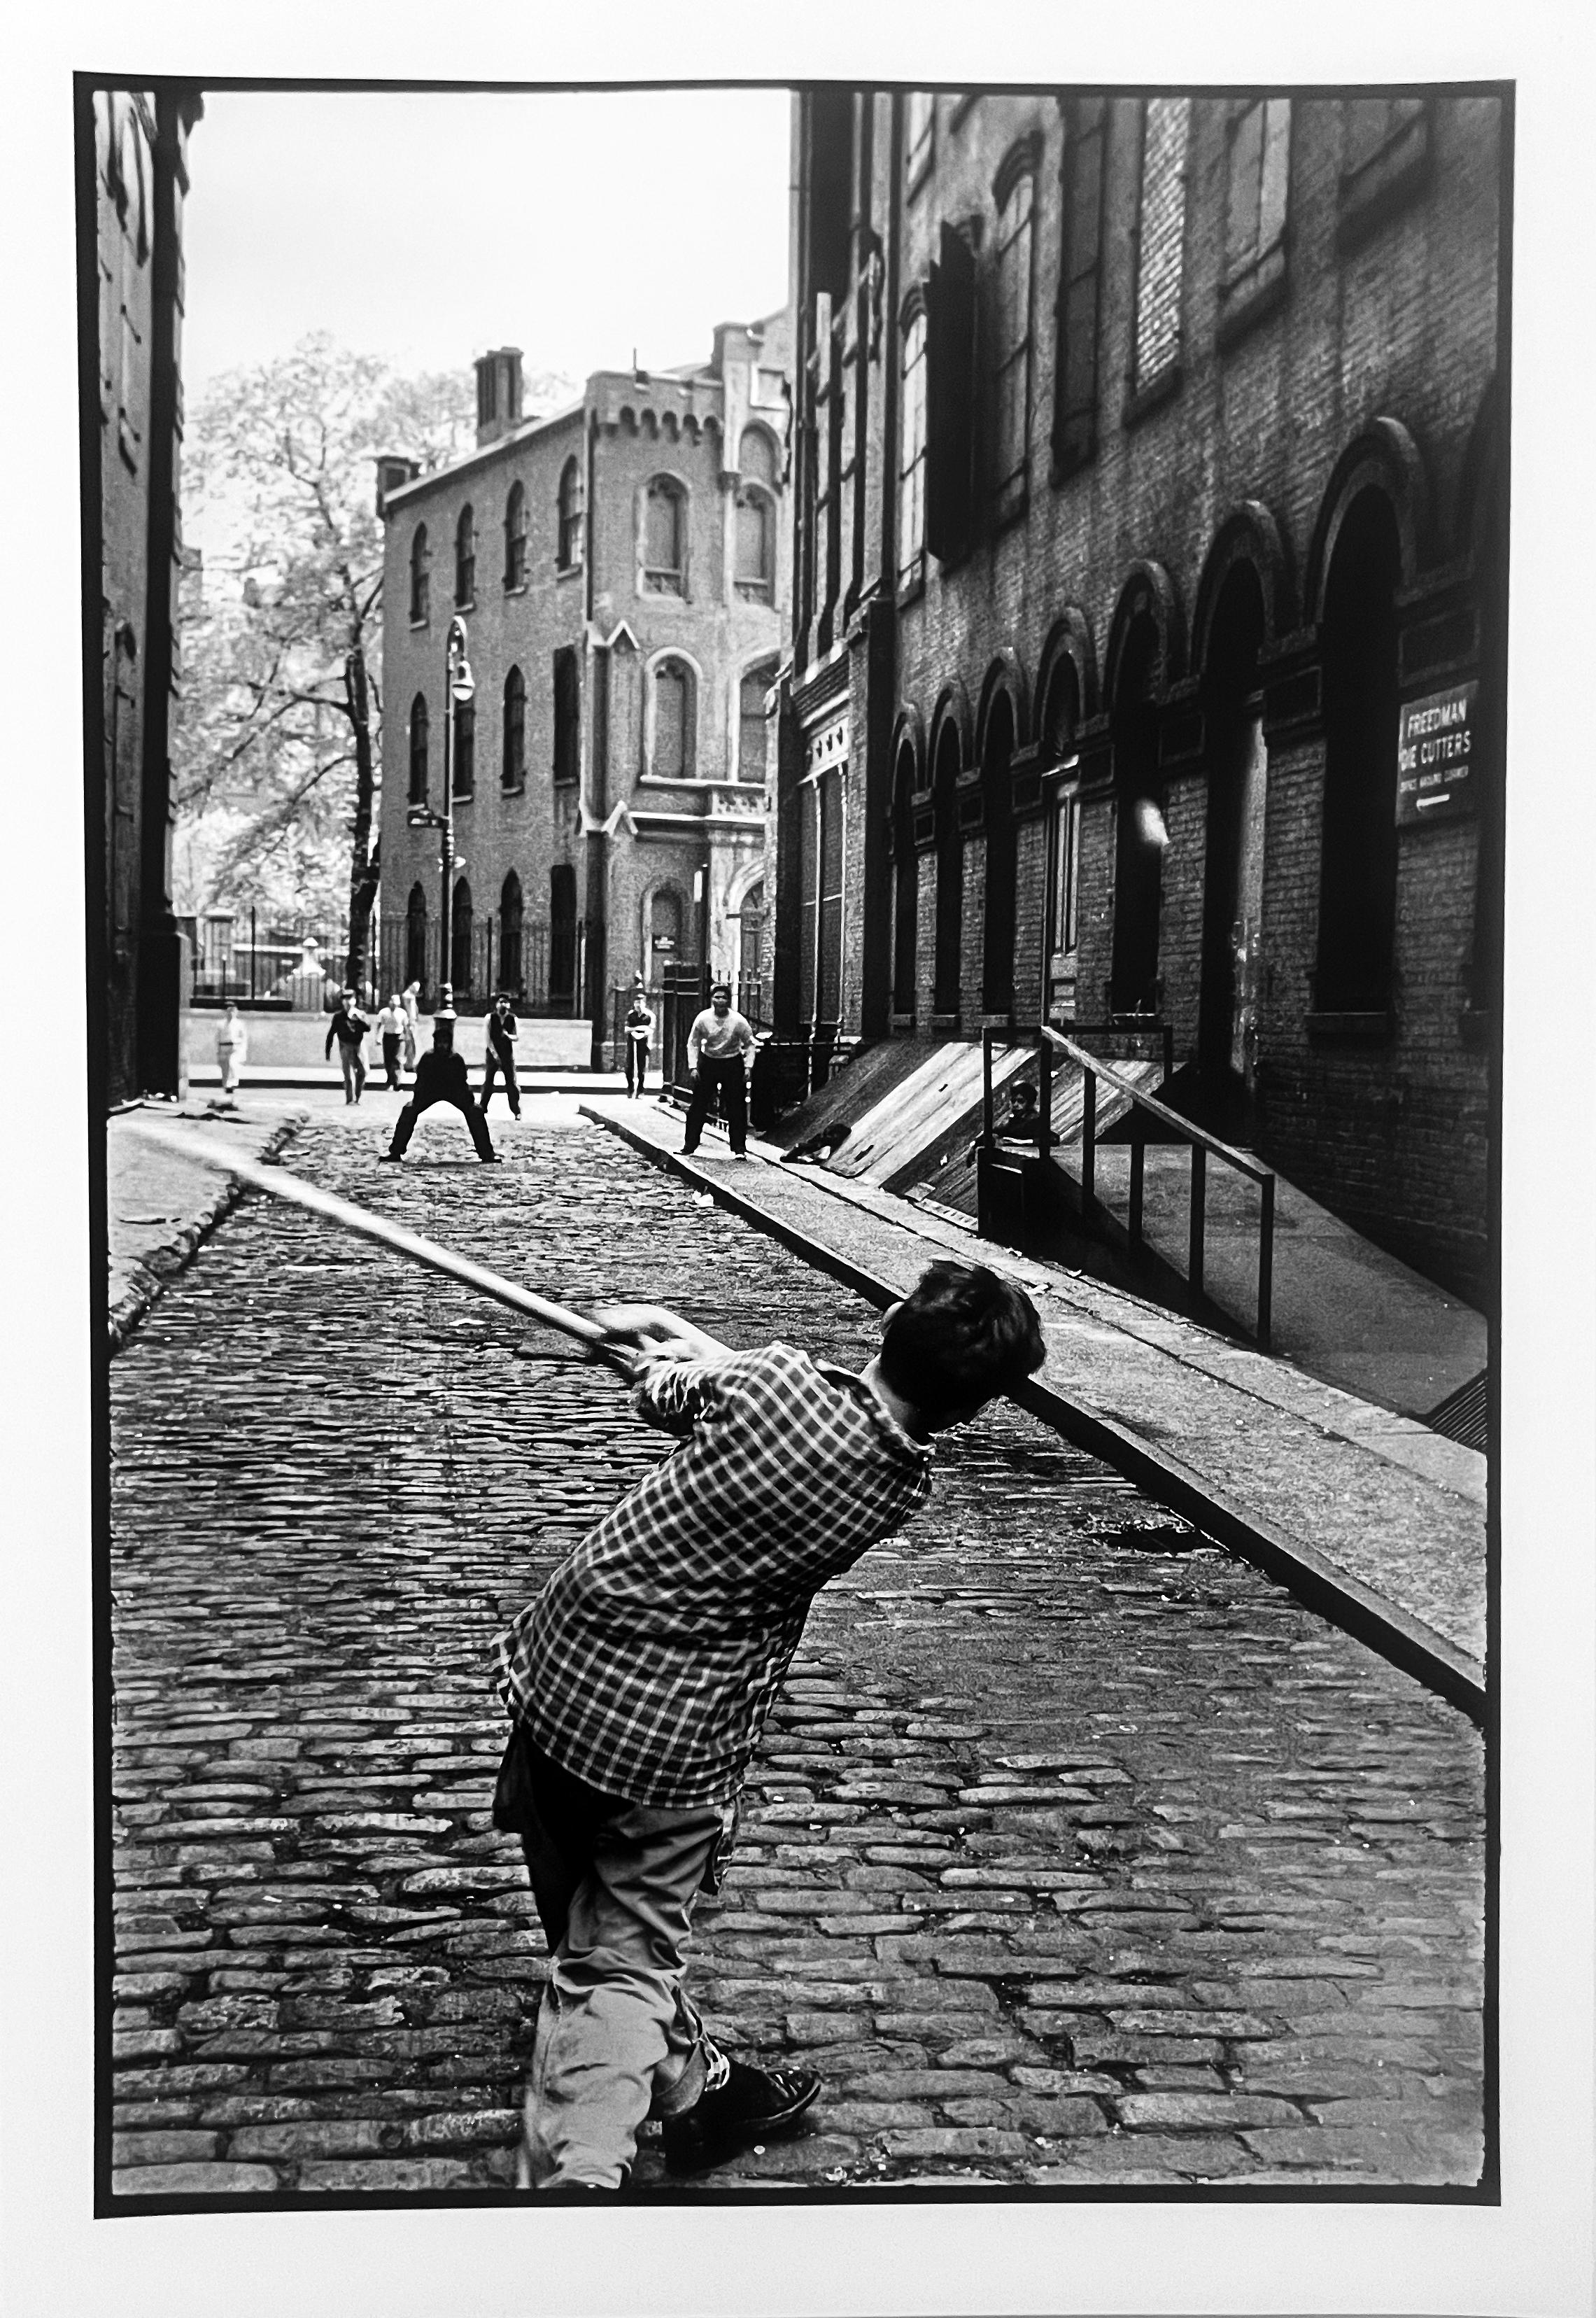 Leonard Freed Black and White Photograph - Stickball, Little Italy, NYC, Black and White Limited Edition Photograph